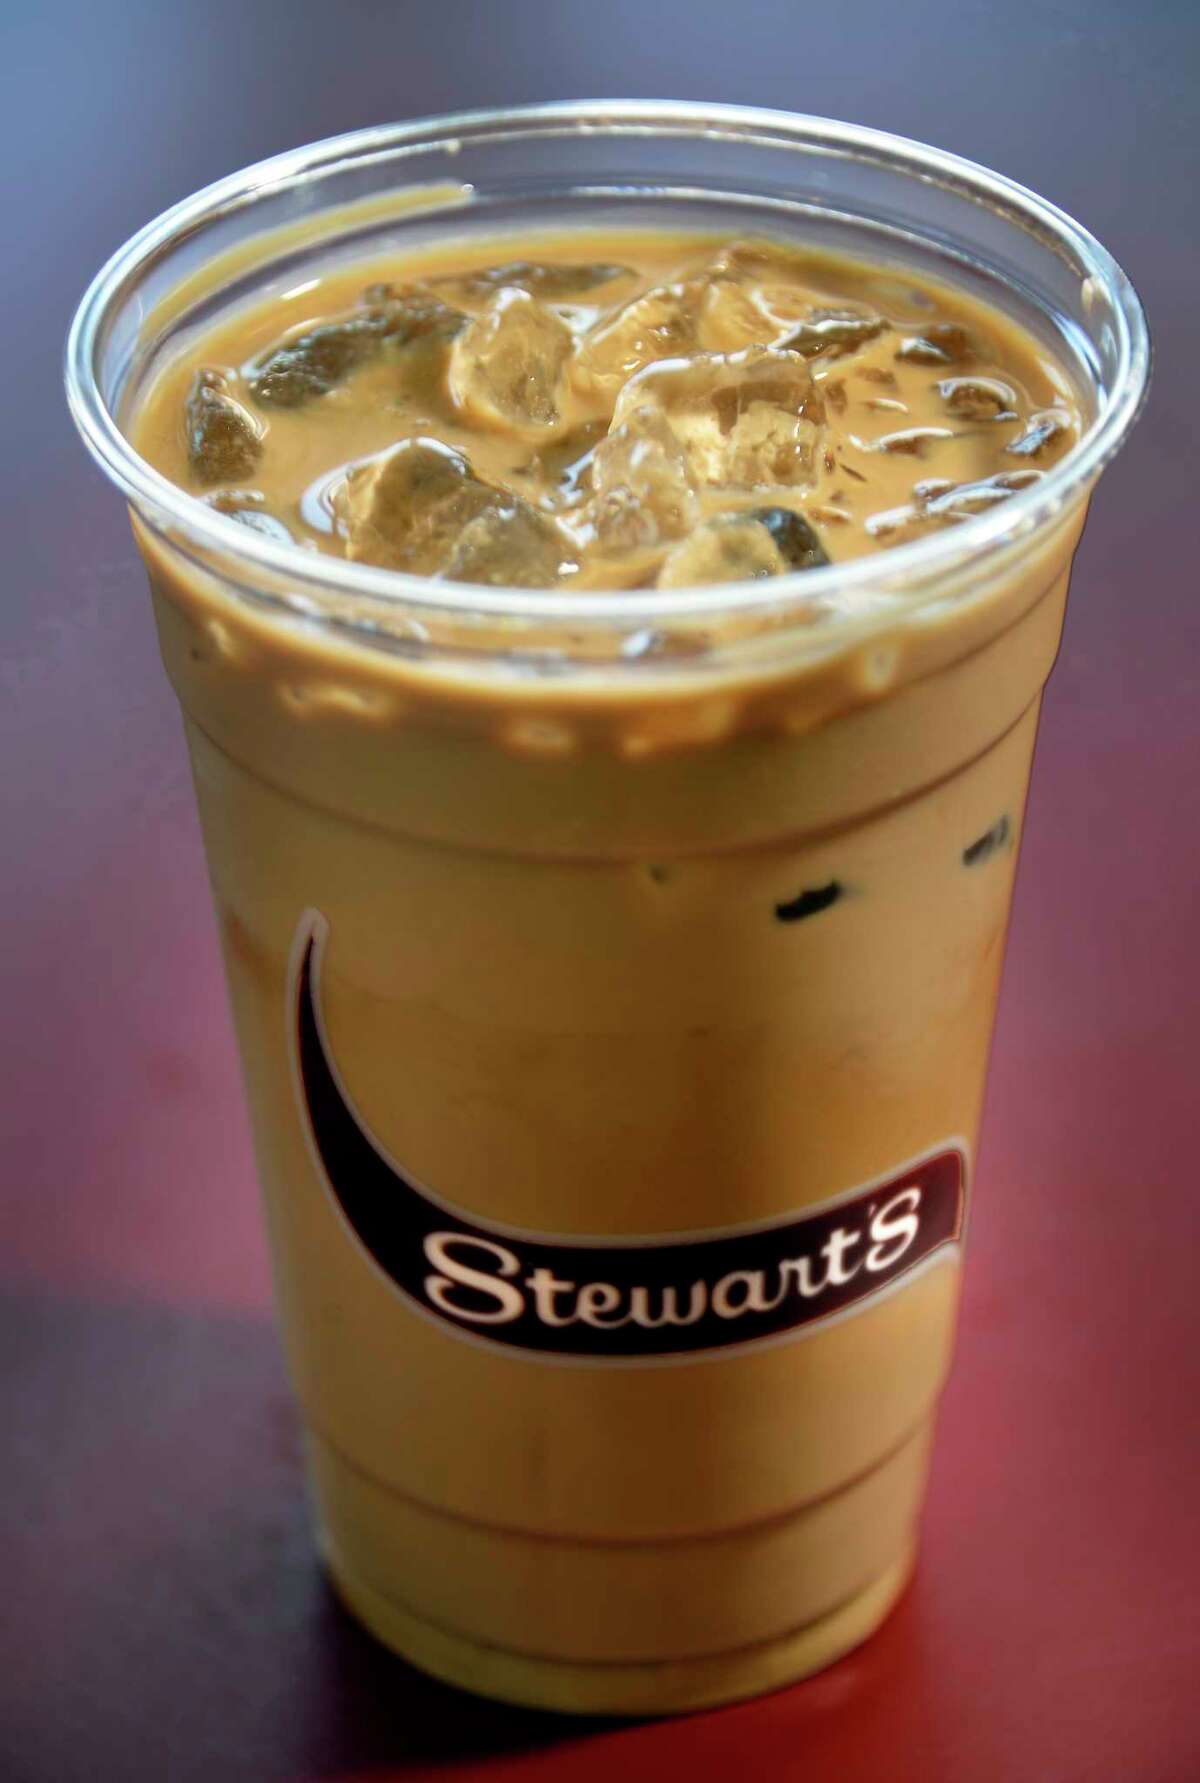 Cold brew coffee grows in popularity